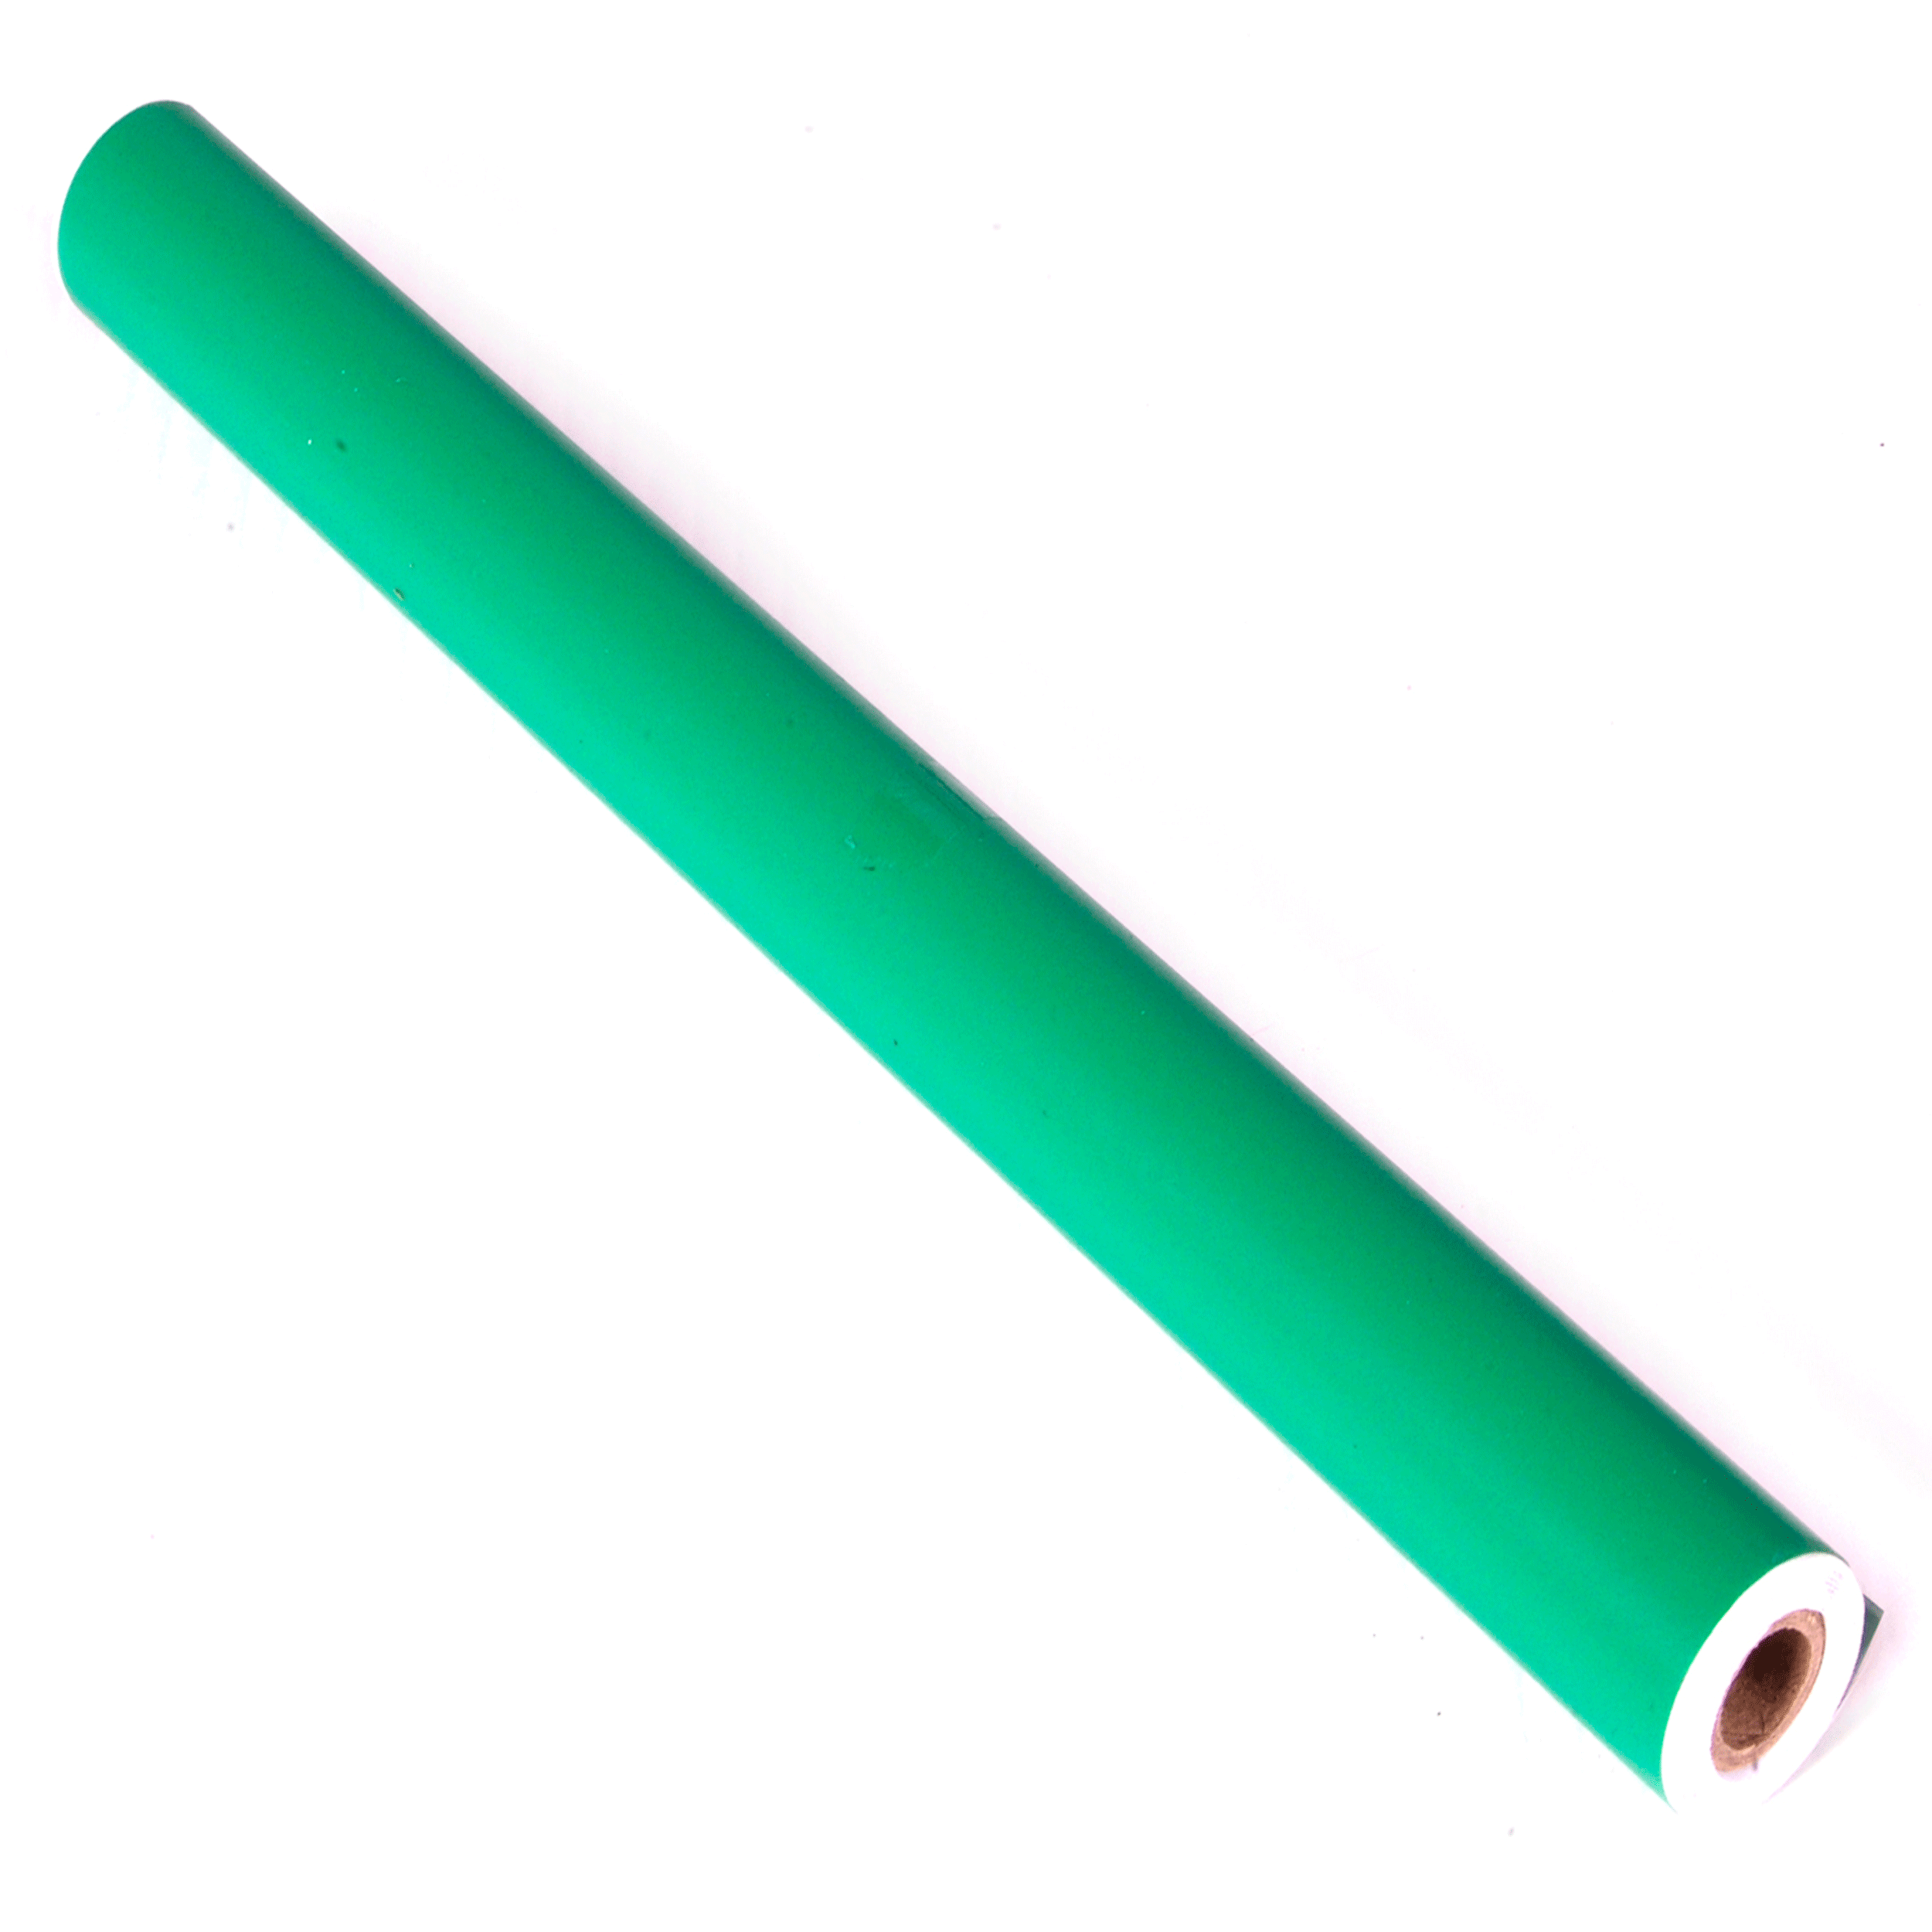 12" X 60" Shadow Board Green Vinyl Self-adhesive Tape Roll To Silhouette And Manage Tools And Equipment